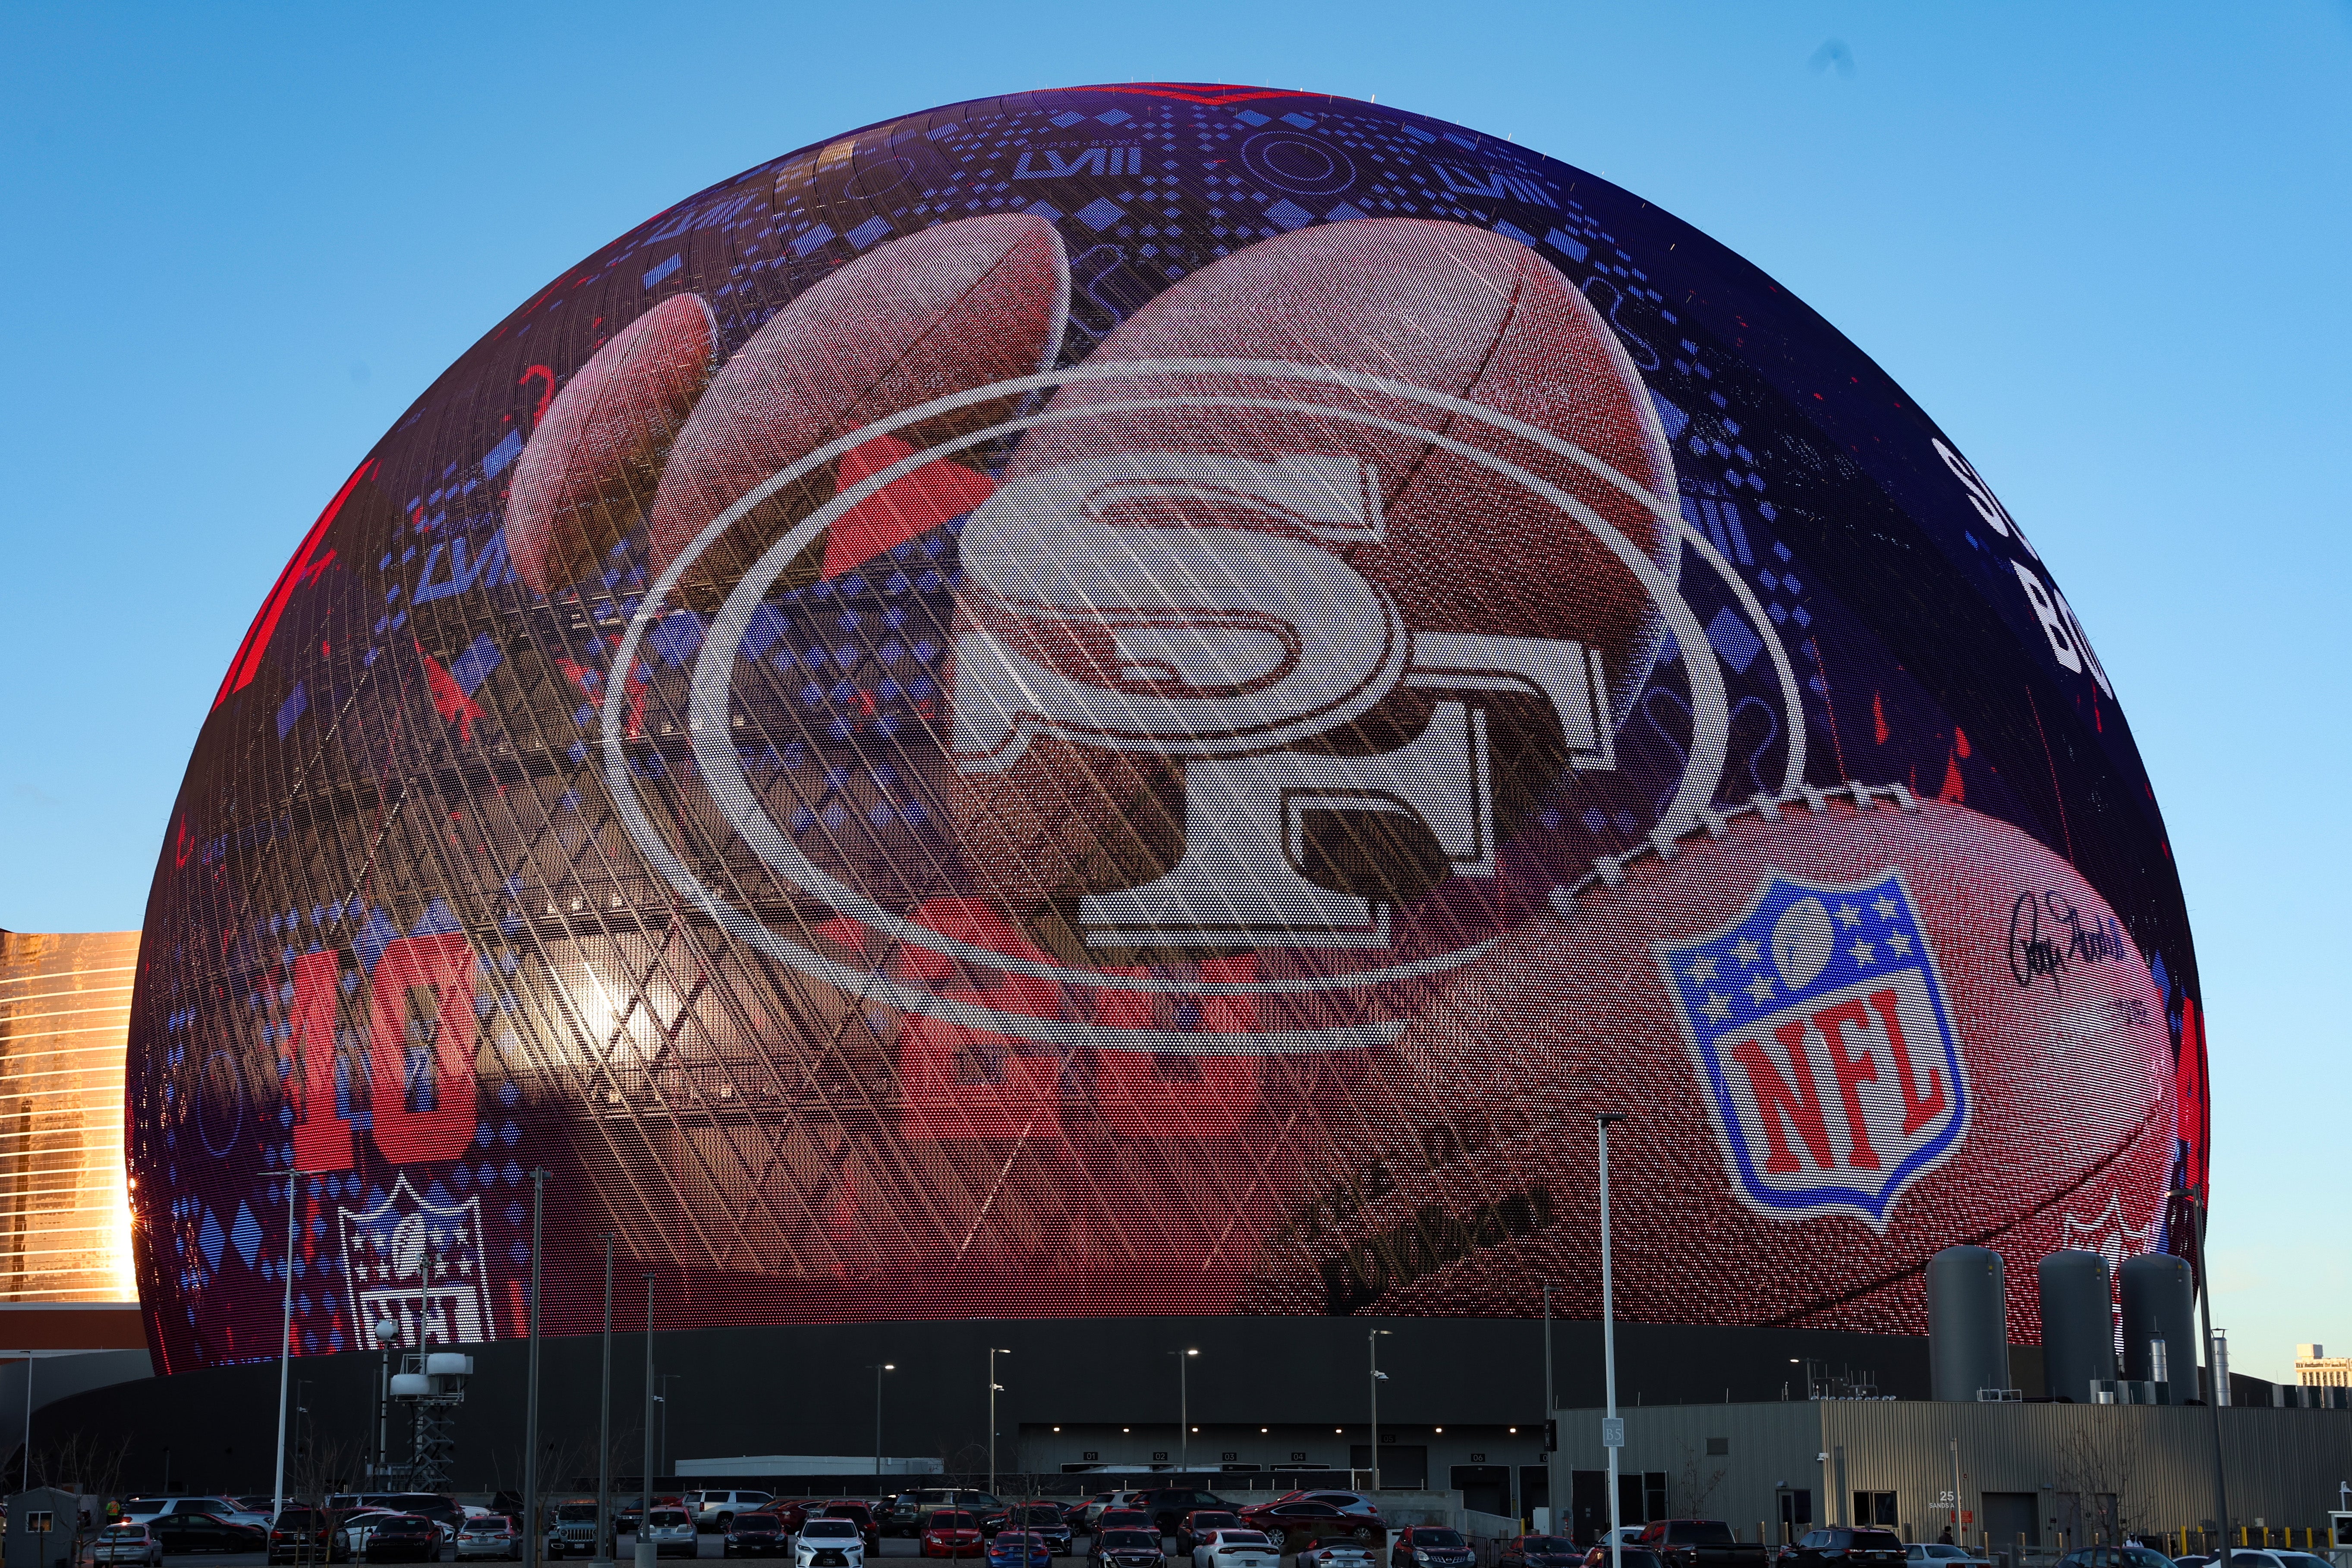 The Sphere displaying San Francisco 49ers signage